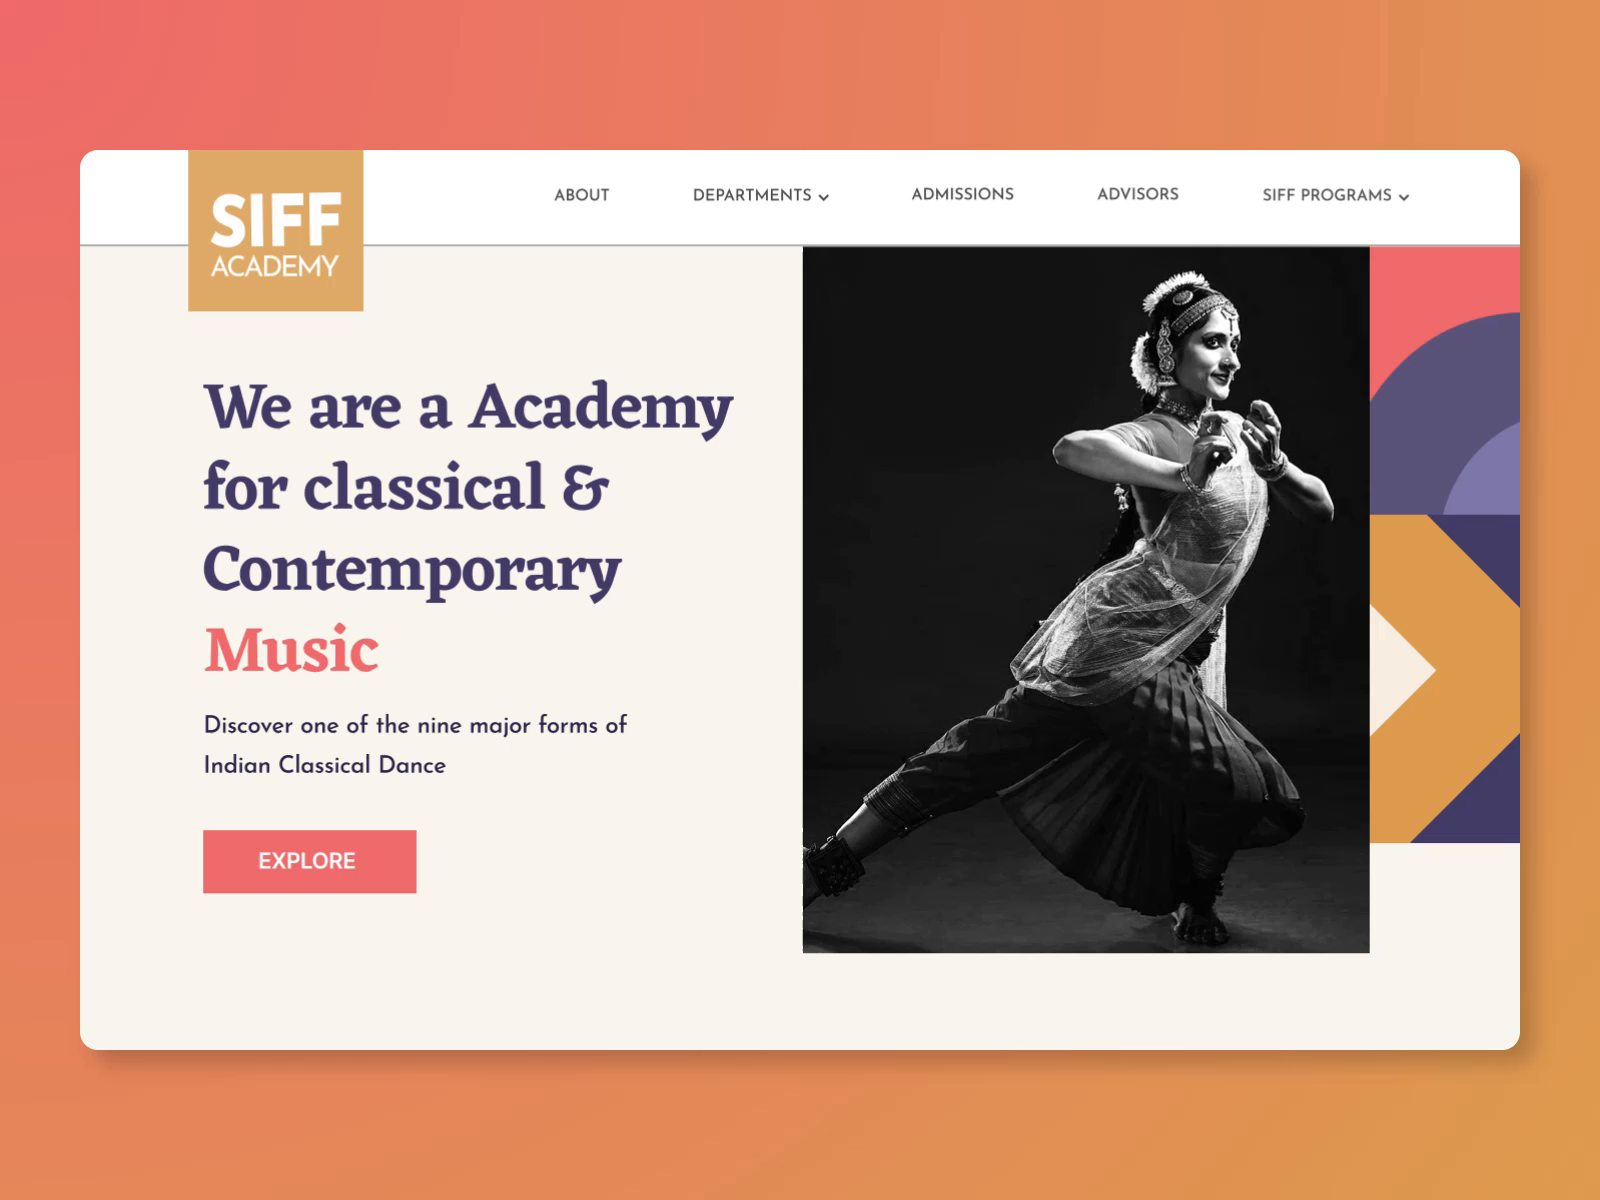 SIFF Academy - Young Artiste